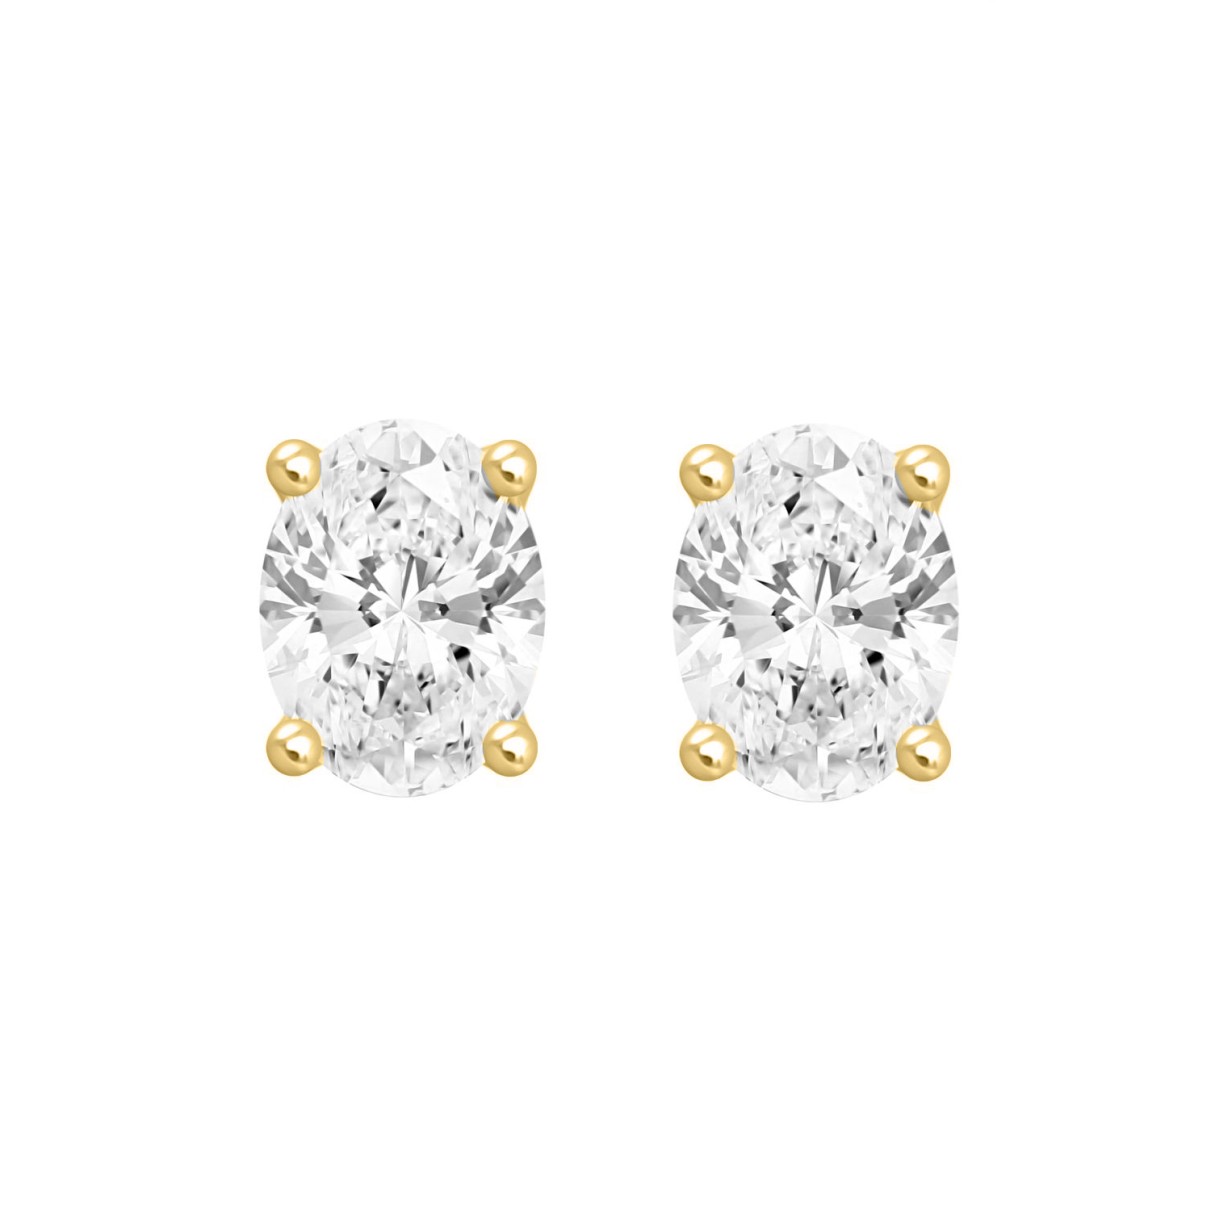 LADIES SOLITAIRE EARRINGS 3CT OVAL DIAMOND 14K YELLOW GOLD (CENTER STONE OVAL DIAMOND 1 1/2CT )